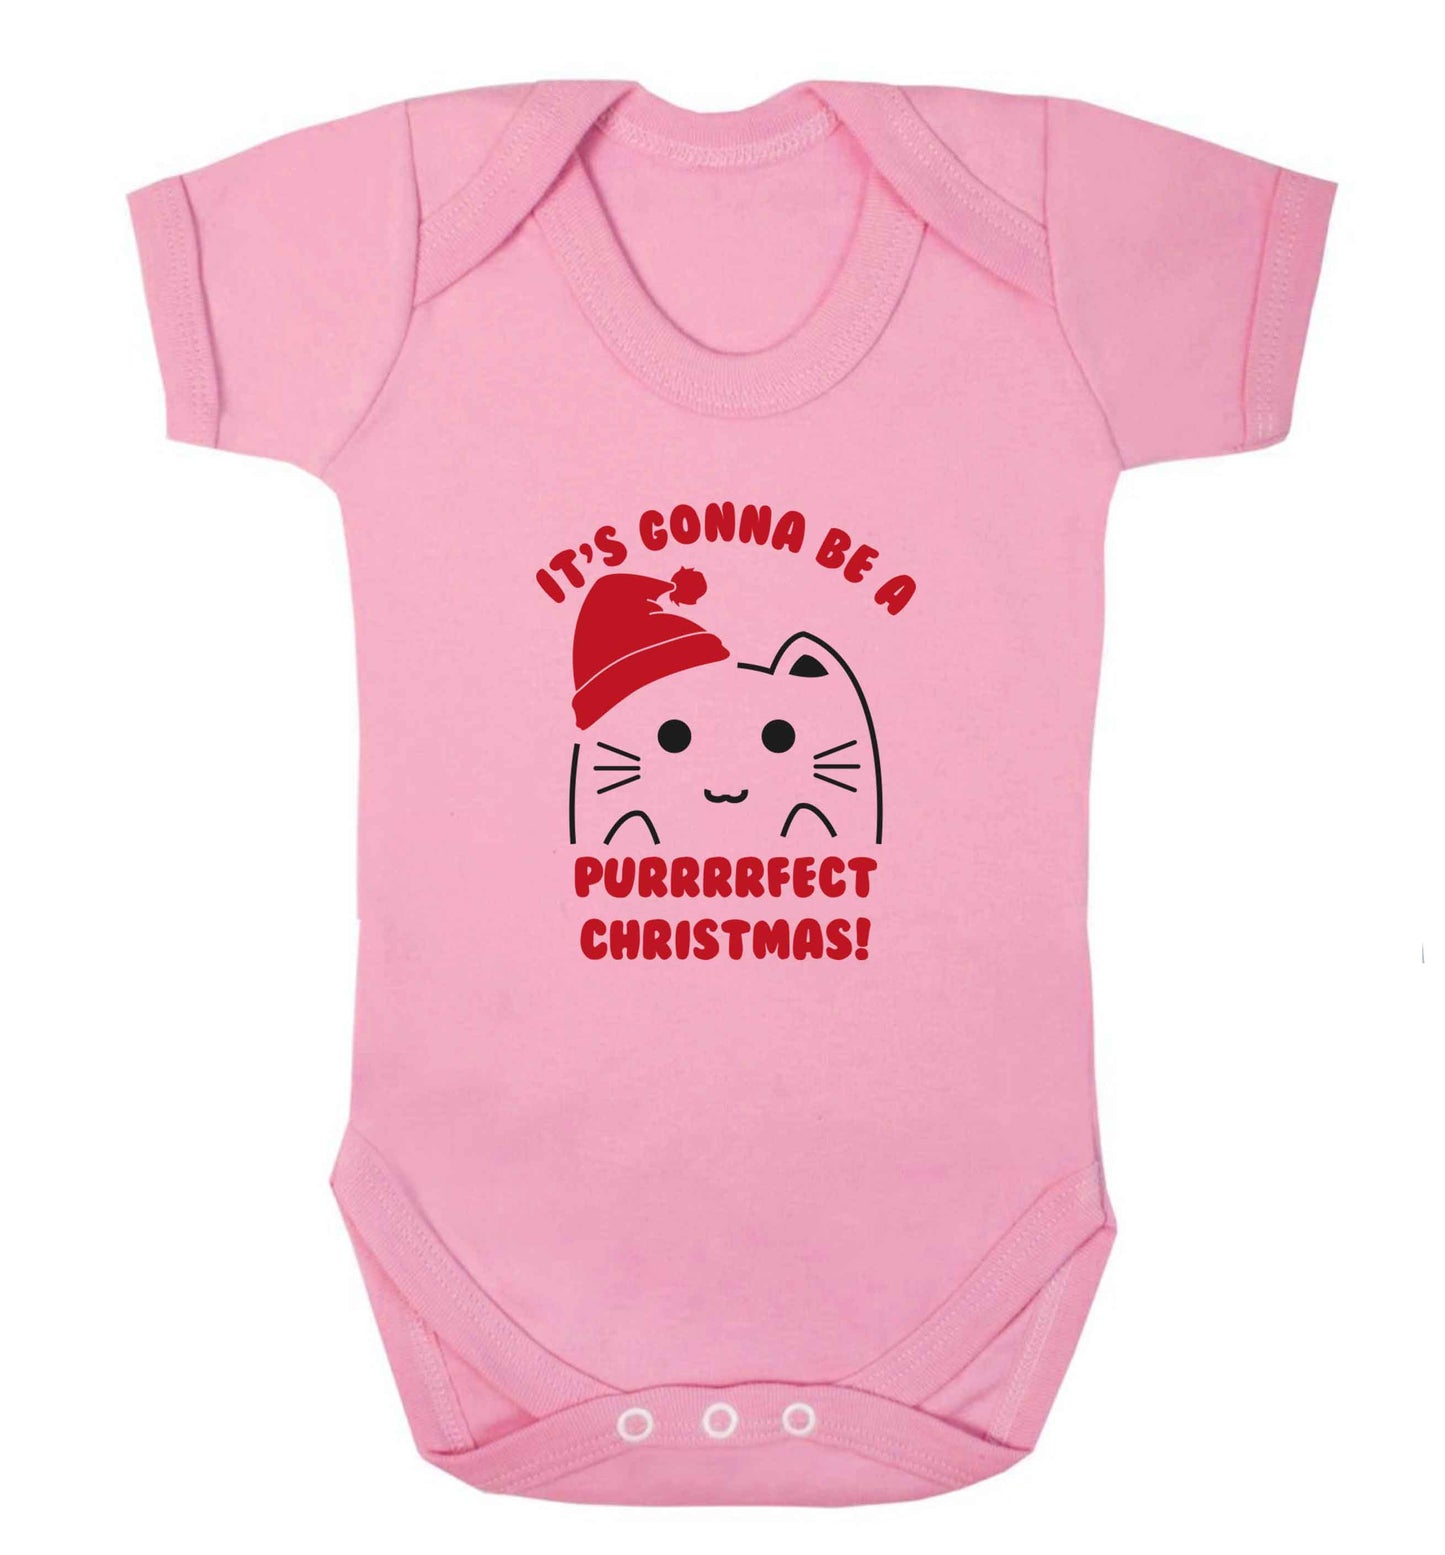 It's going to be a purrfect Christmas baby vest pale pink 18-24 months